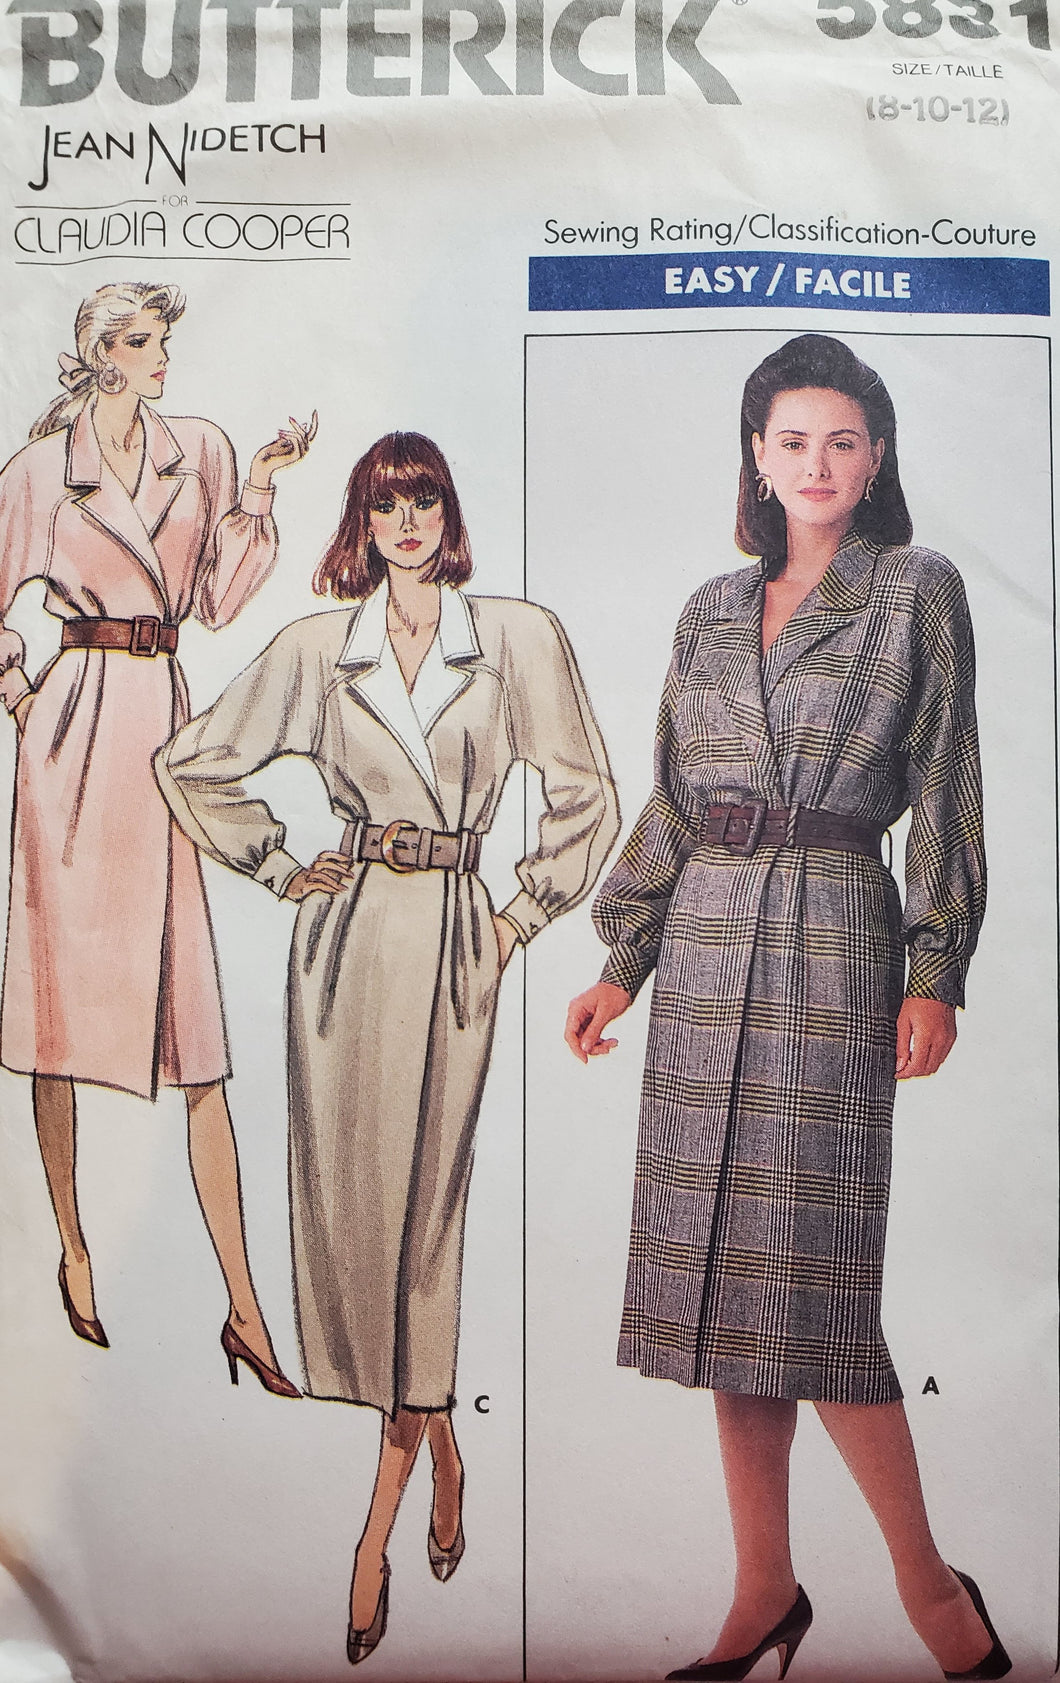 Butterick 5831 UNCUT, UNUSED Designer Jean Nidetch, Wrap Dress with Notched Collar, Size 8-10-12